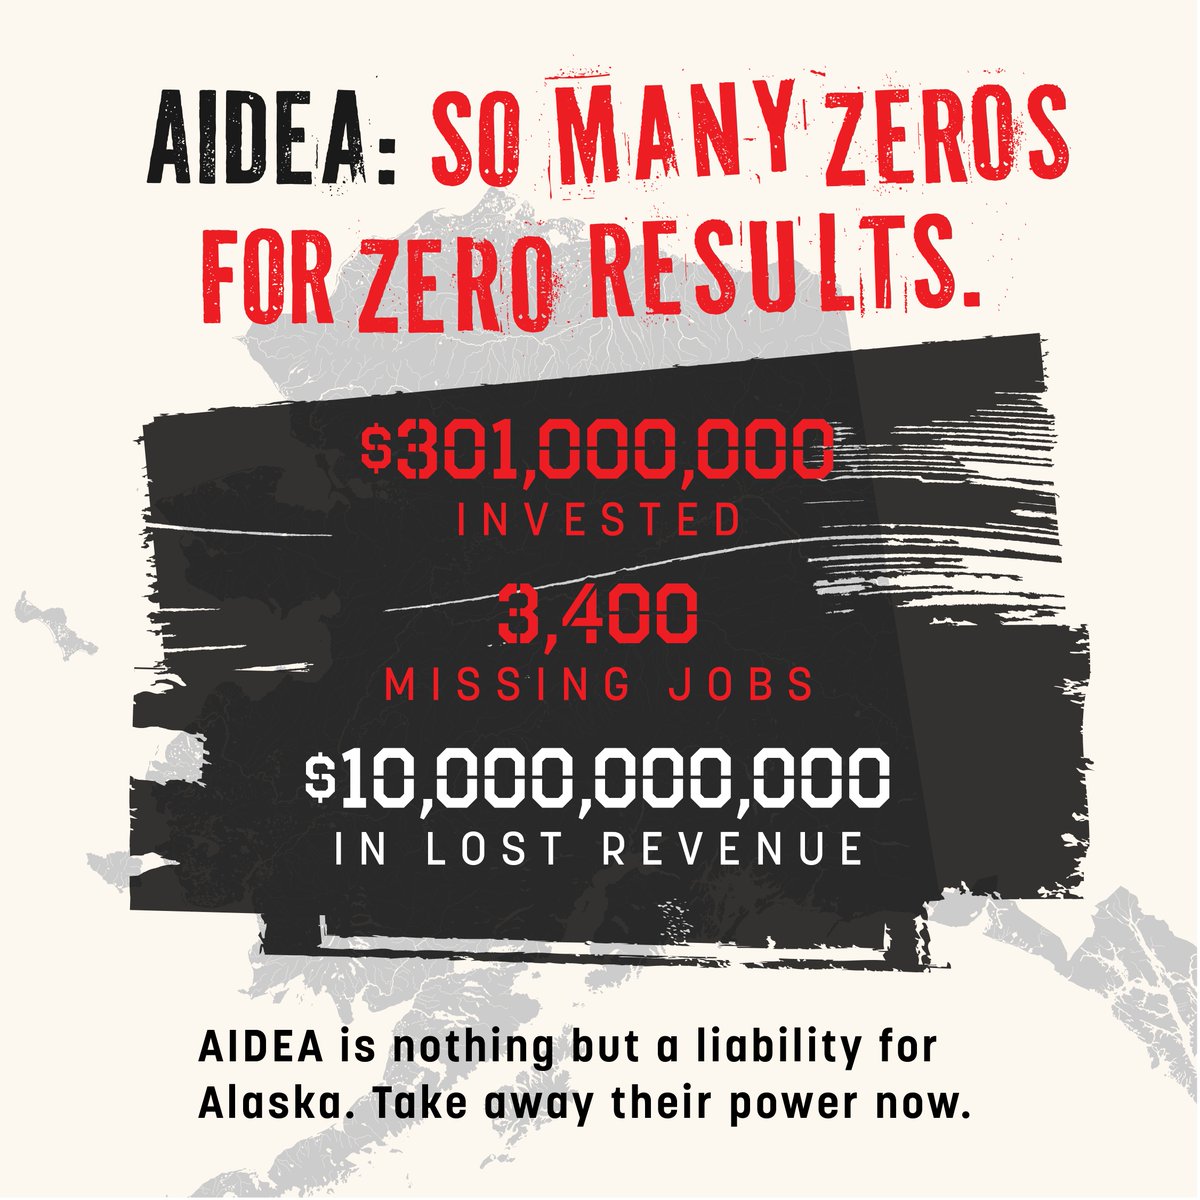 Want the inside scoop on a floundering, publicly-funded Alaska corporation? Alaskans are taking action right now to stop AIDEA from moving forward with anymore terrible ideas. Not living in Alaska? Head to the link to learn more about AIDEA and how you can support our work.